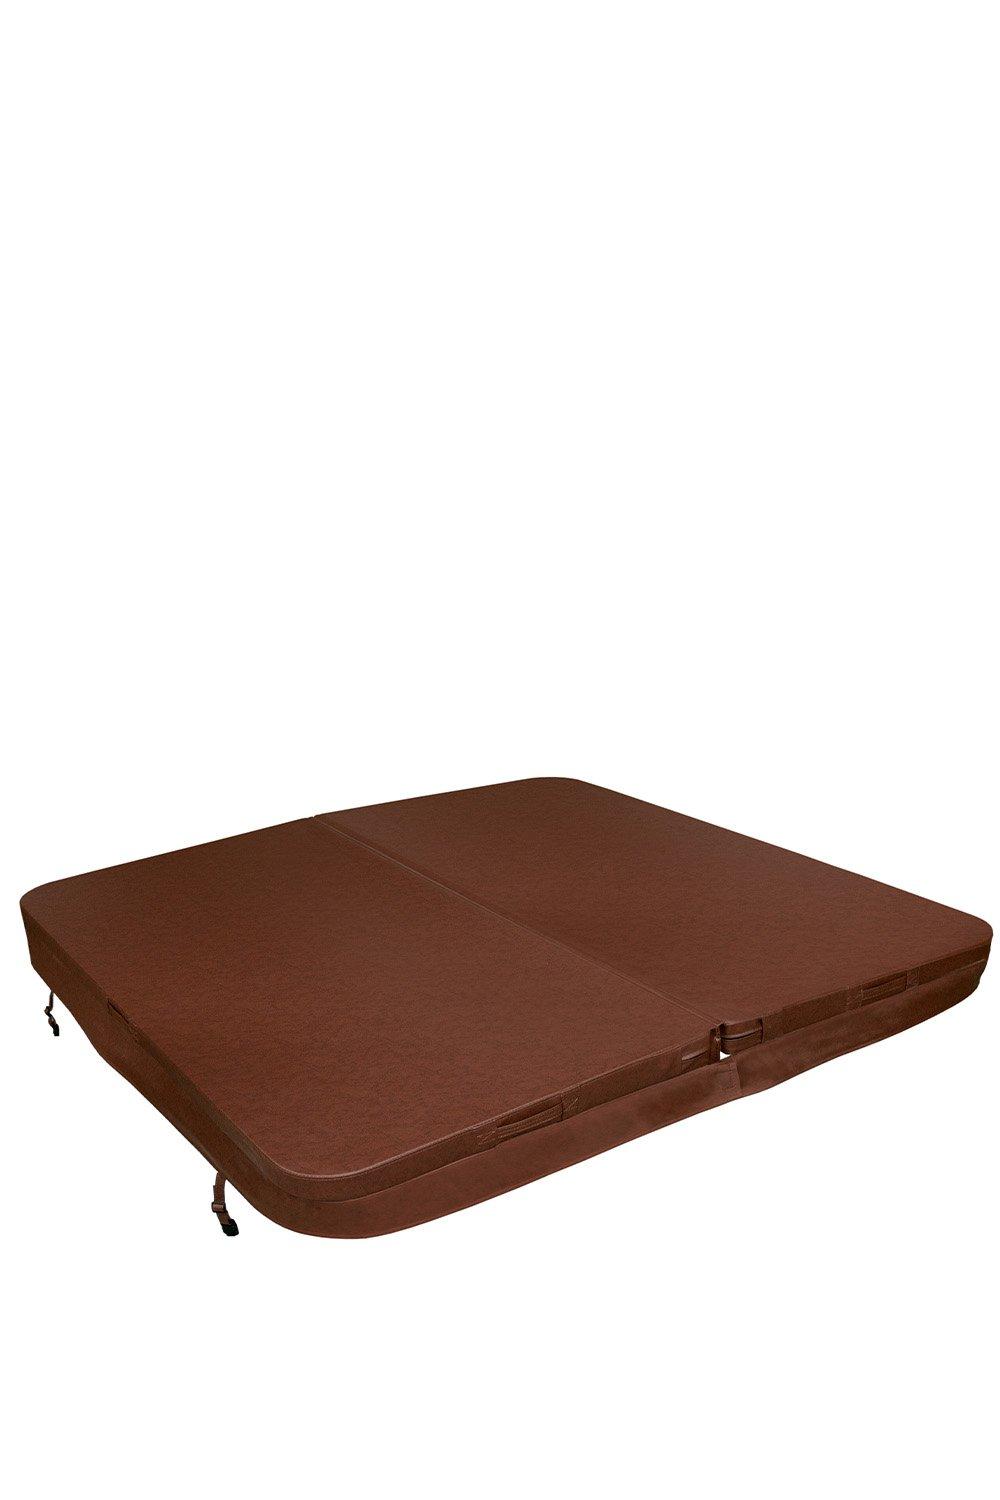 2.2m Hot Tub Spa Cover - Brown